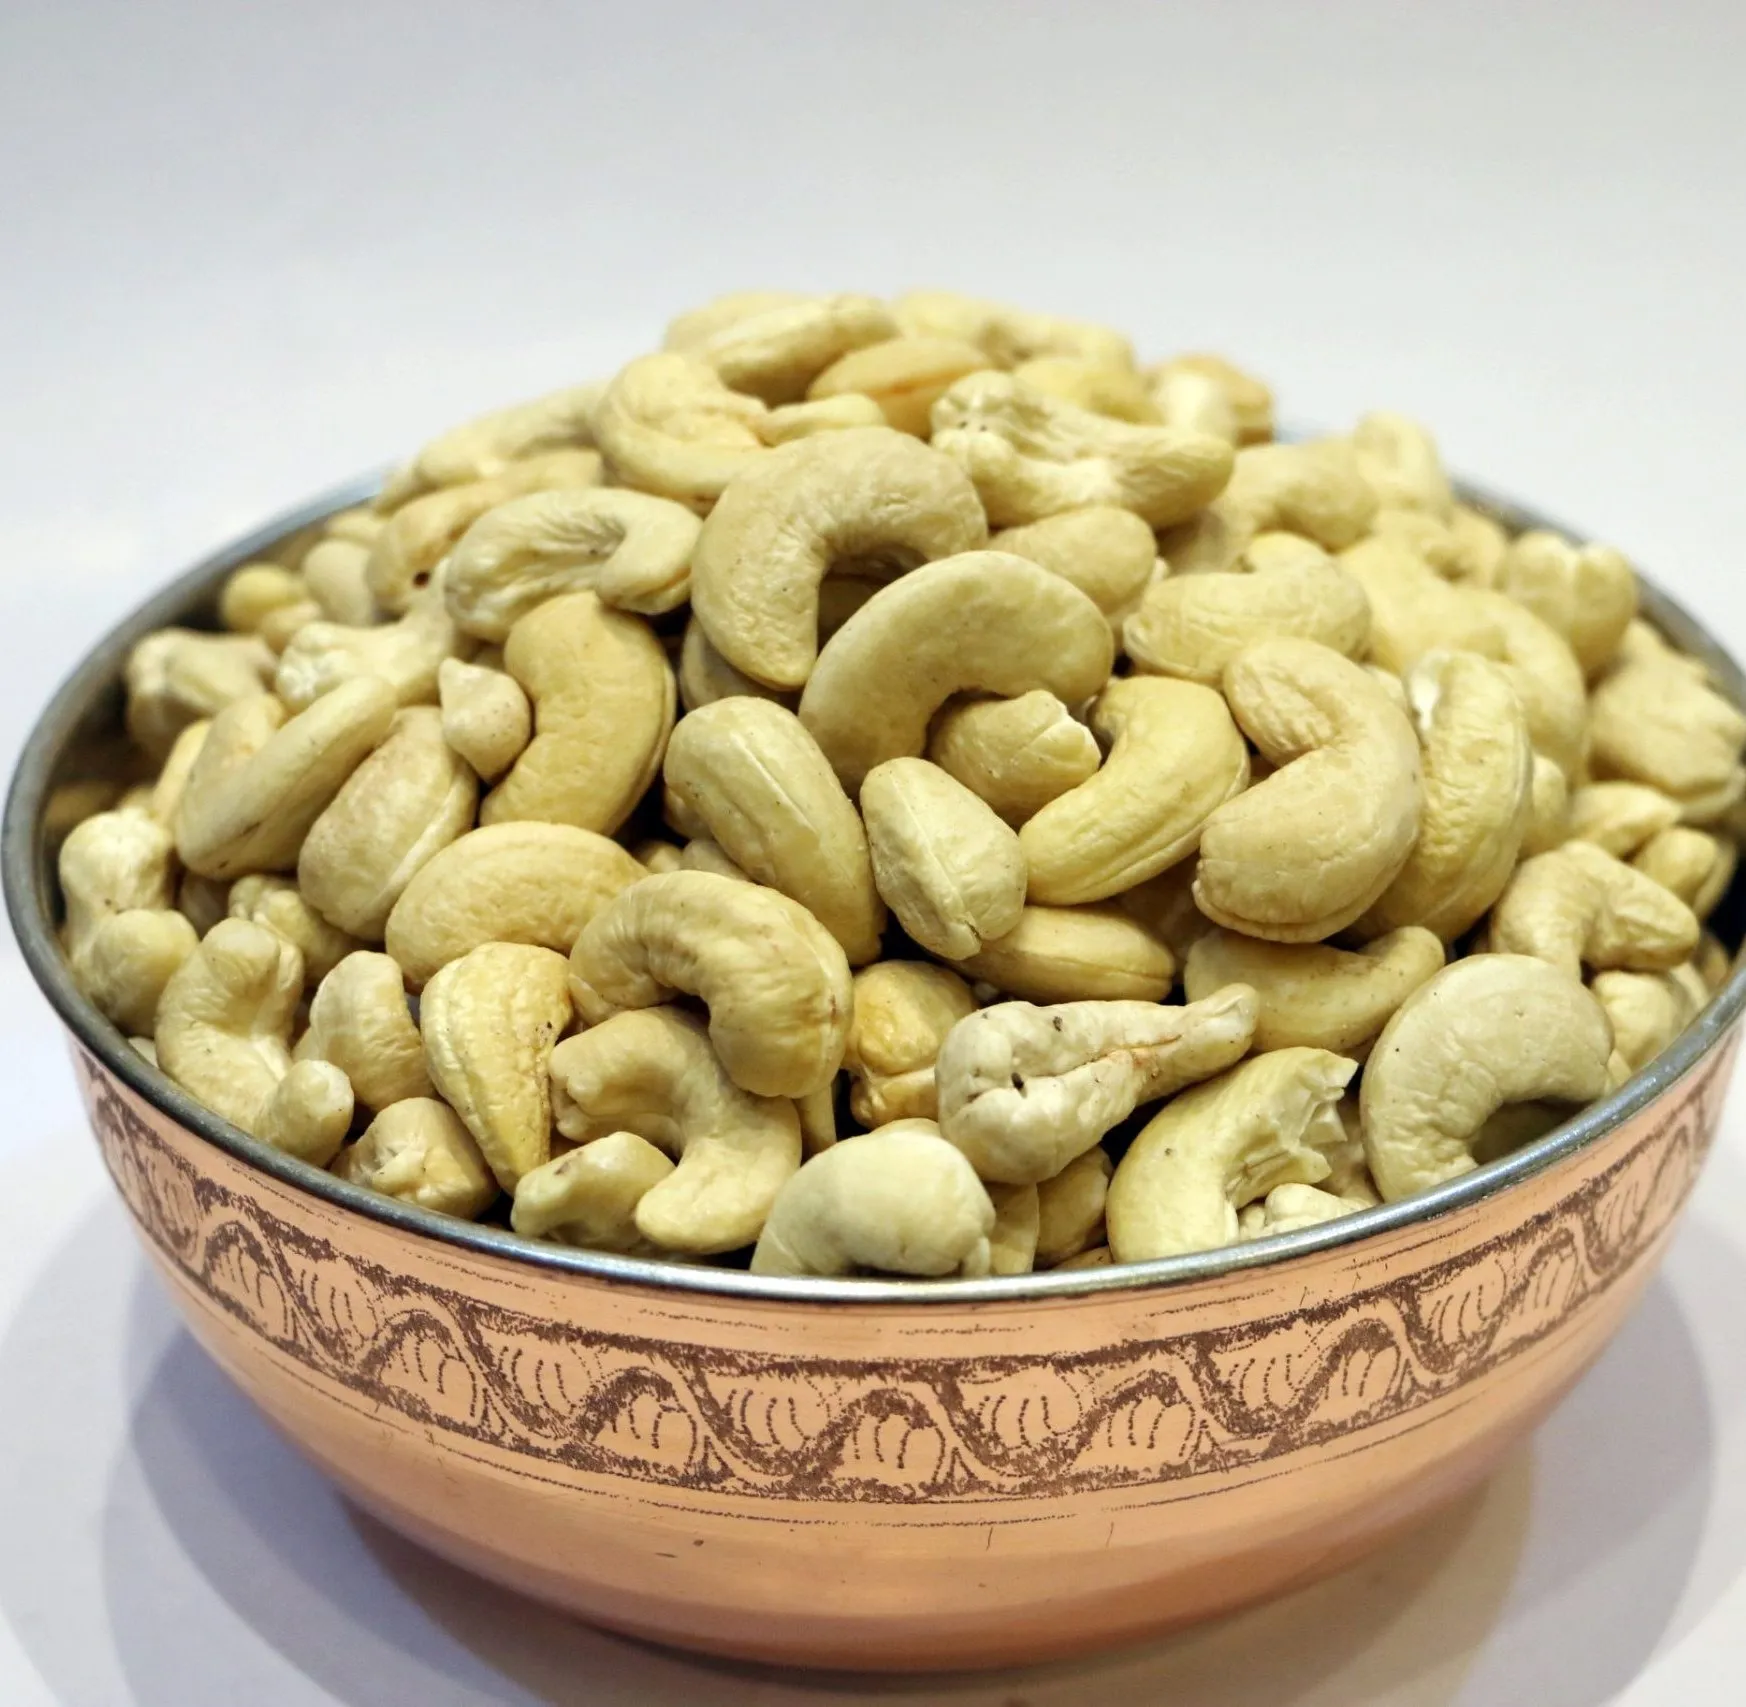 raw cashews vs roasted purchase price + quality test